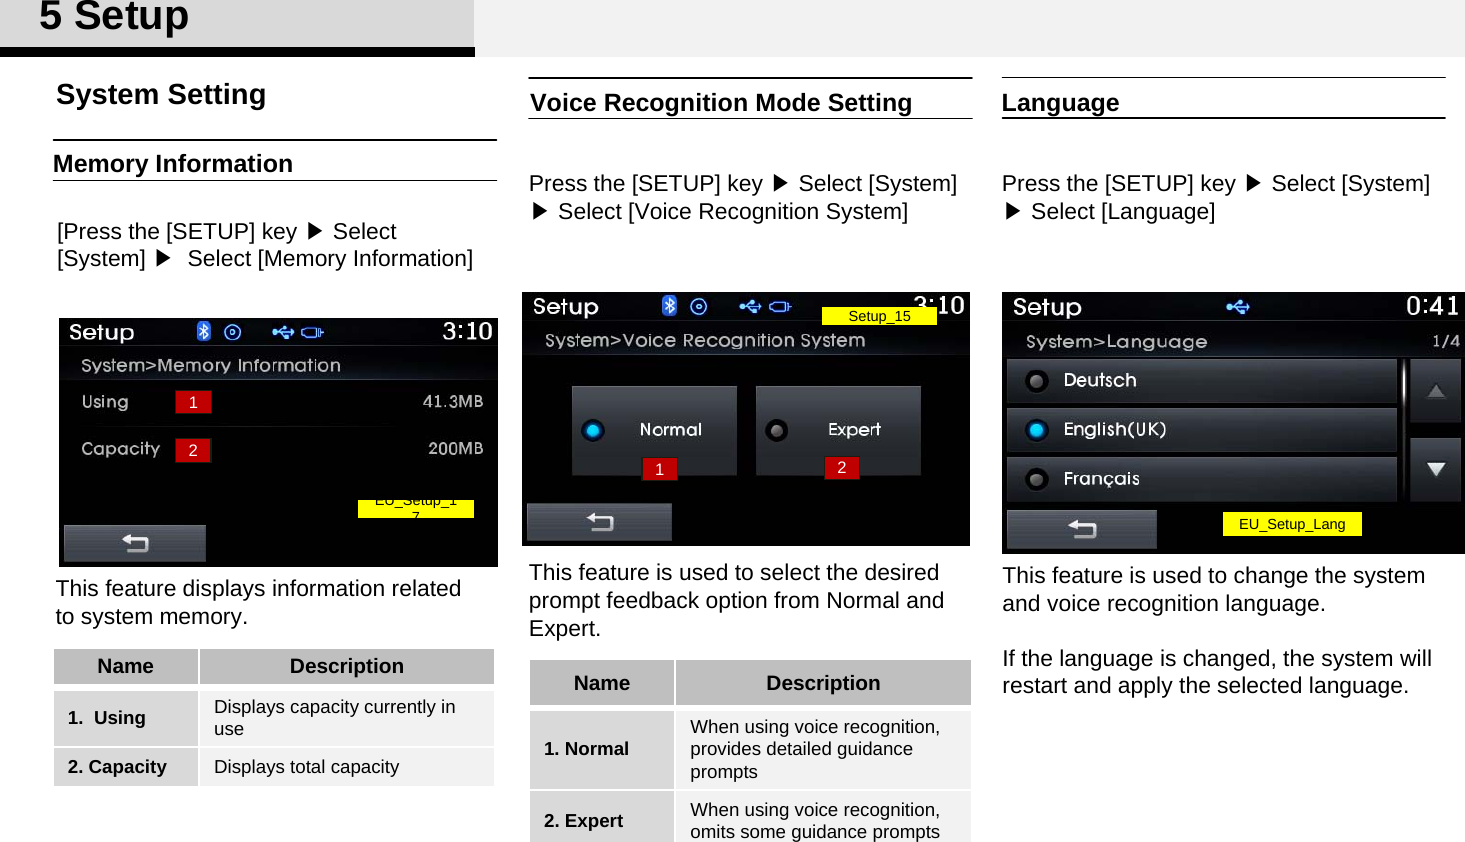 Voice Recognition Mode SettingPress the [SETUP] key ▶Select [System] ▶Select [Voice Recognition System]This feature is used to select the desired  prompt feedback option from Normal and Expert. Memory Information[Press the [SETUP] key ▶Select [System] ▶ Select [Memory Information]This feature displays information related to system memory. System Setting5SetupName Description1. Normal When using voice recognition, provides detailed guidance prompts2. Expert When using voice recognition, omits some guidance prompts Name Description1.  Using Displays capacity currently in use2. Capacity Displays total capacity12Setup_1512EU_Setup_1 7LanguagePress the [SETUP] key ▶Select [System] ▶Select [Language]This feature is used to change the system and voice recognition language. If the language is changed, the system will restart and apply the selected language.EU_Setup_Lang